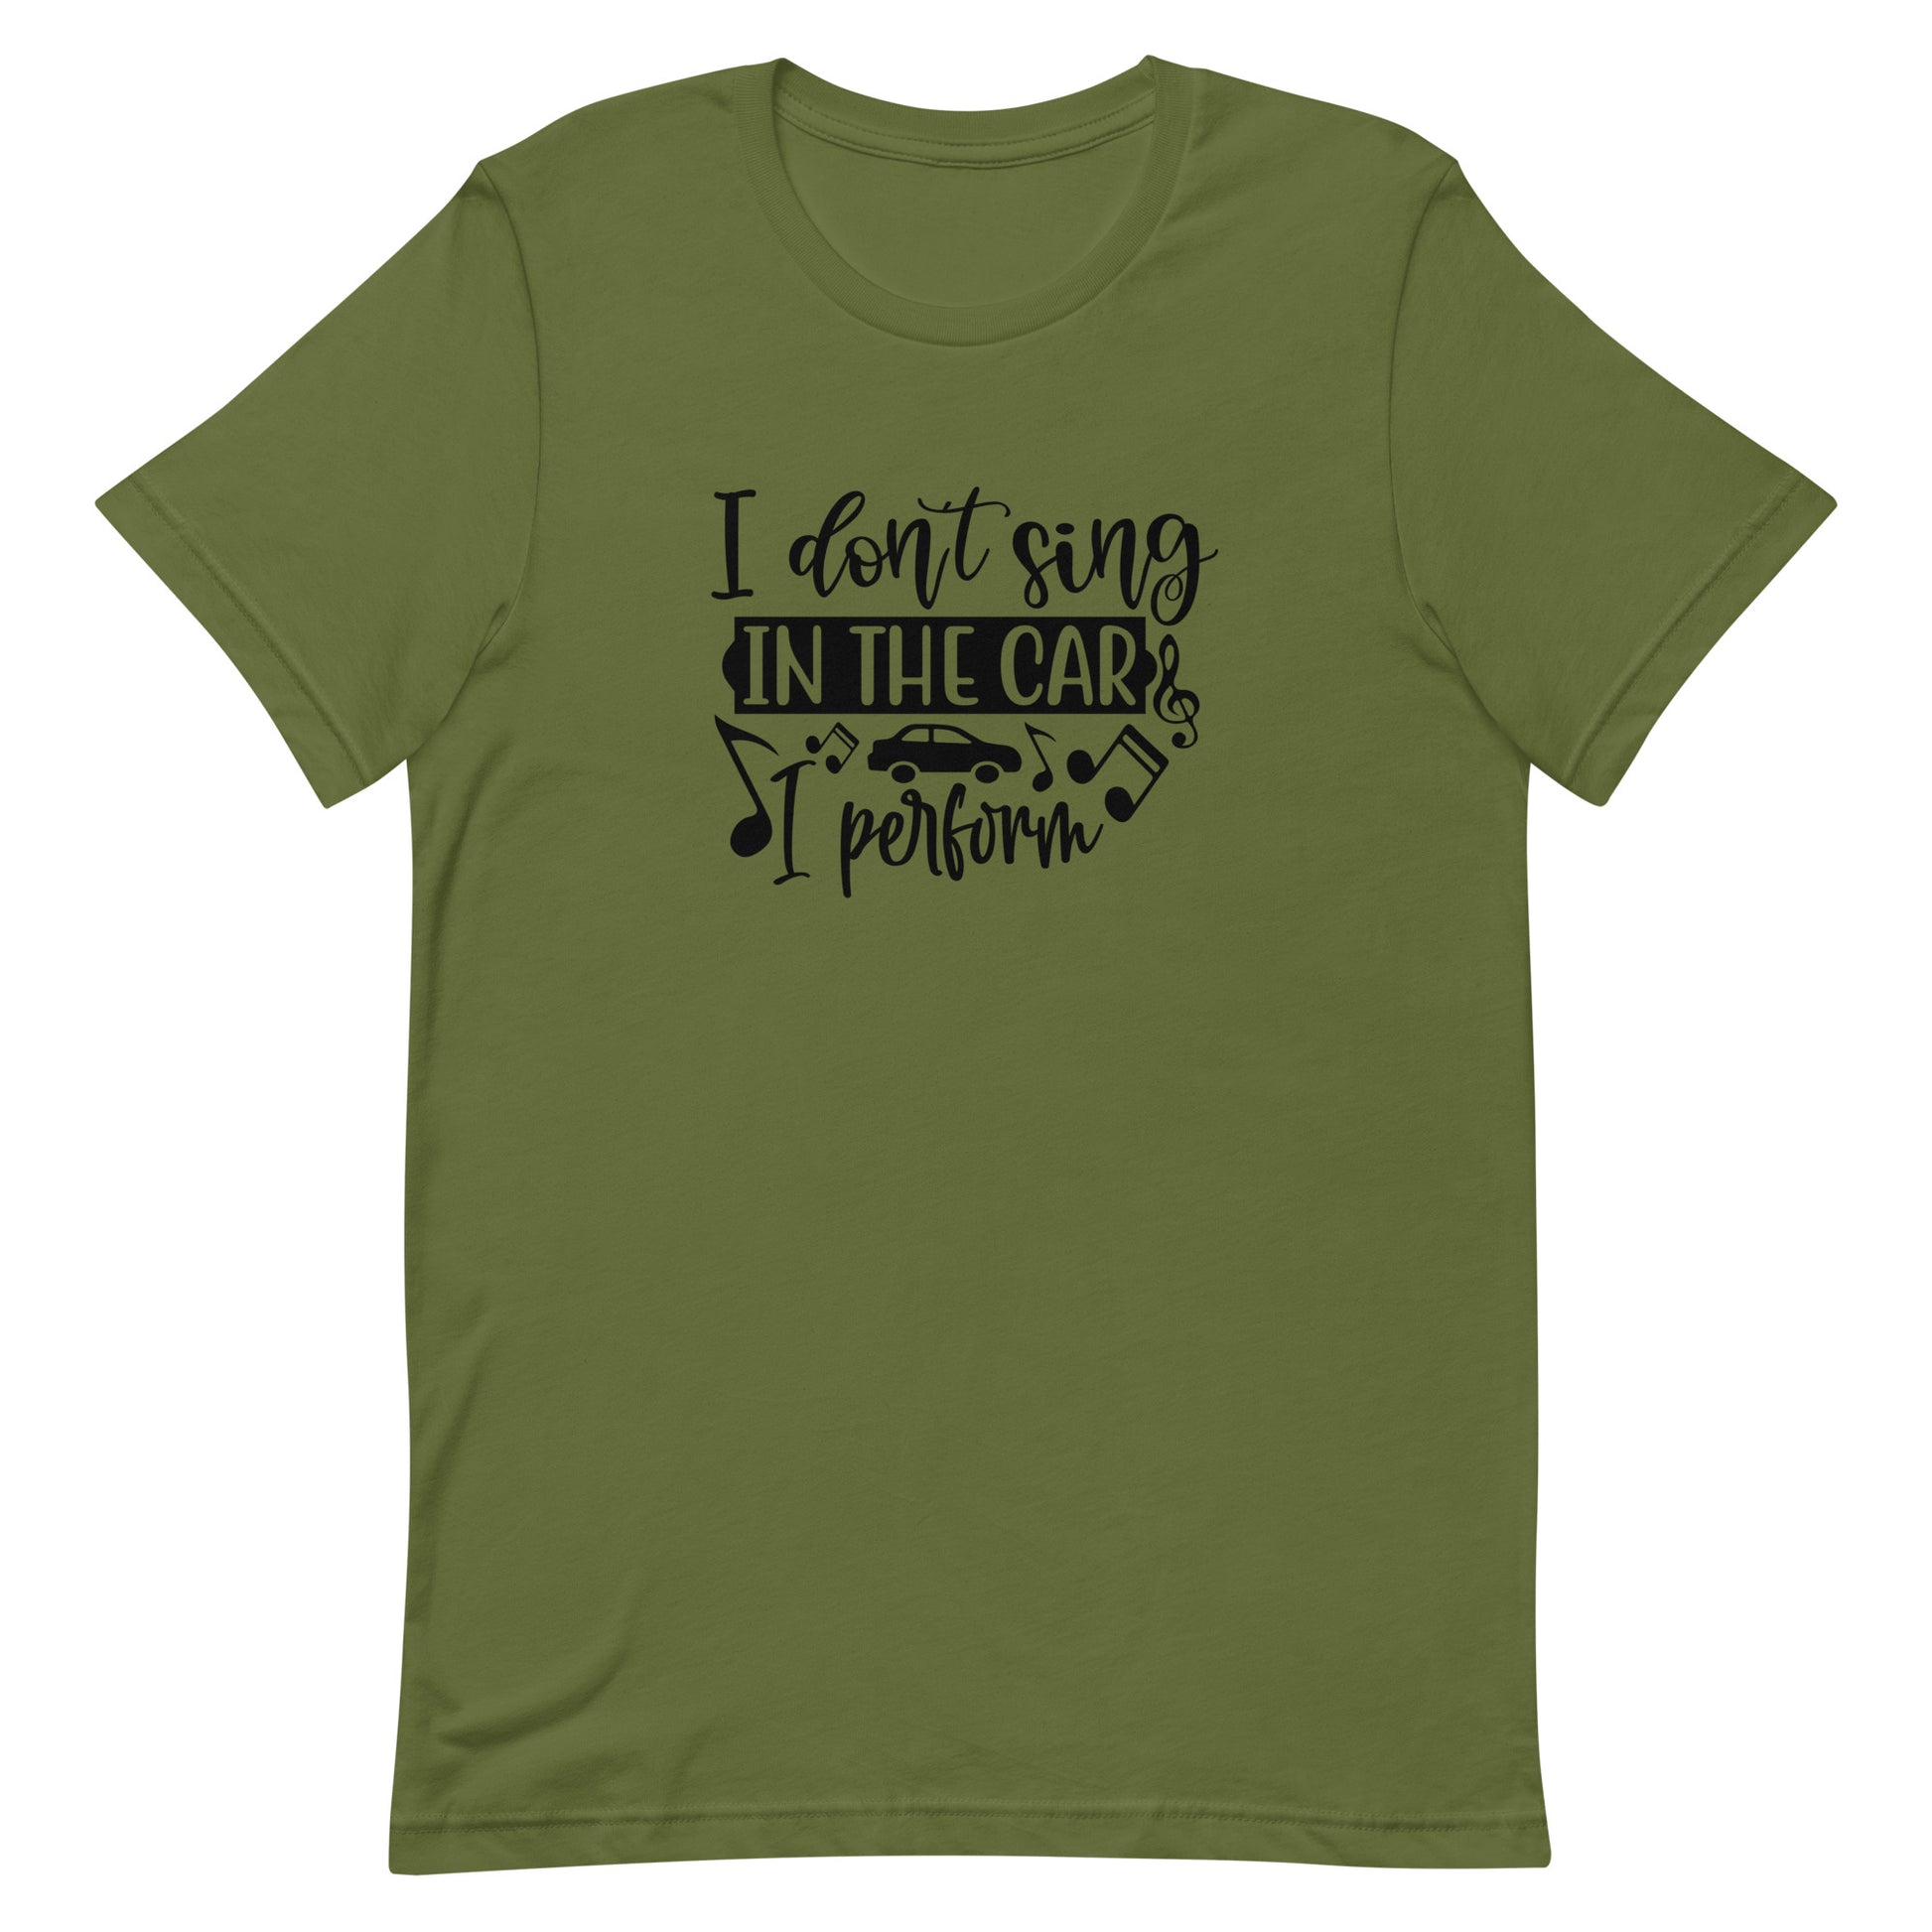 I Don't Sing in the Car I Perform Unisex T-shirt - Music